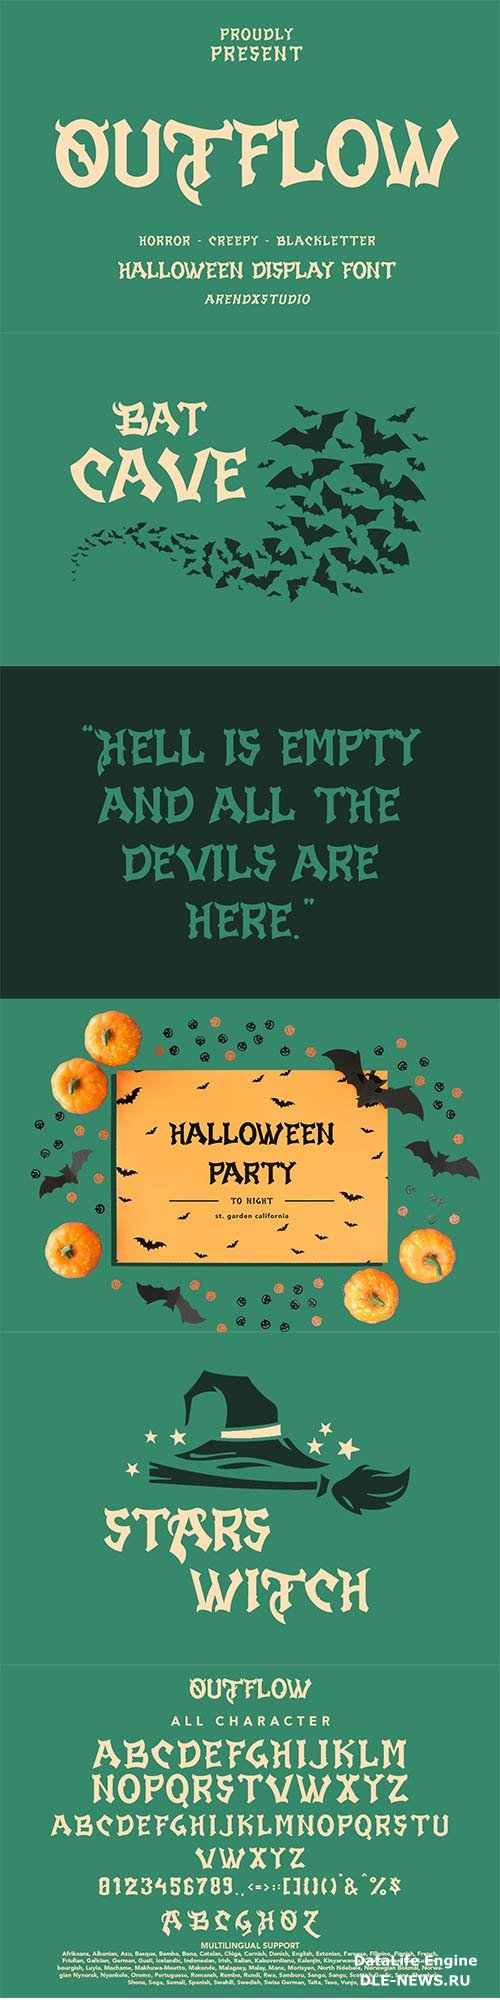 Outflow - Halloween Display Font